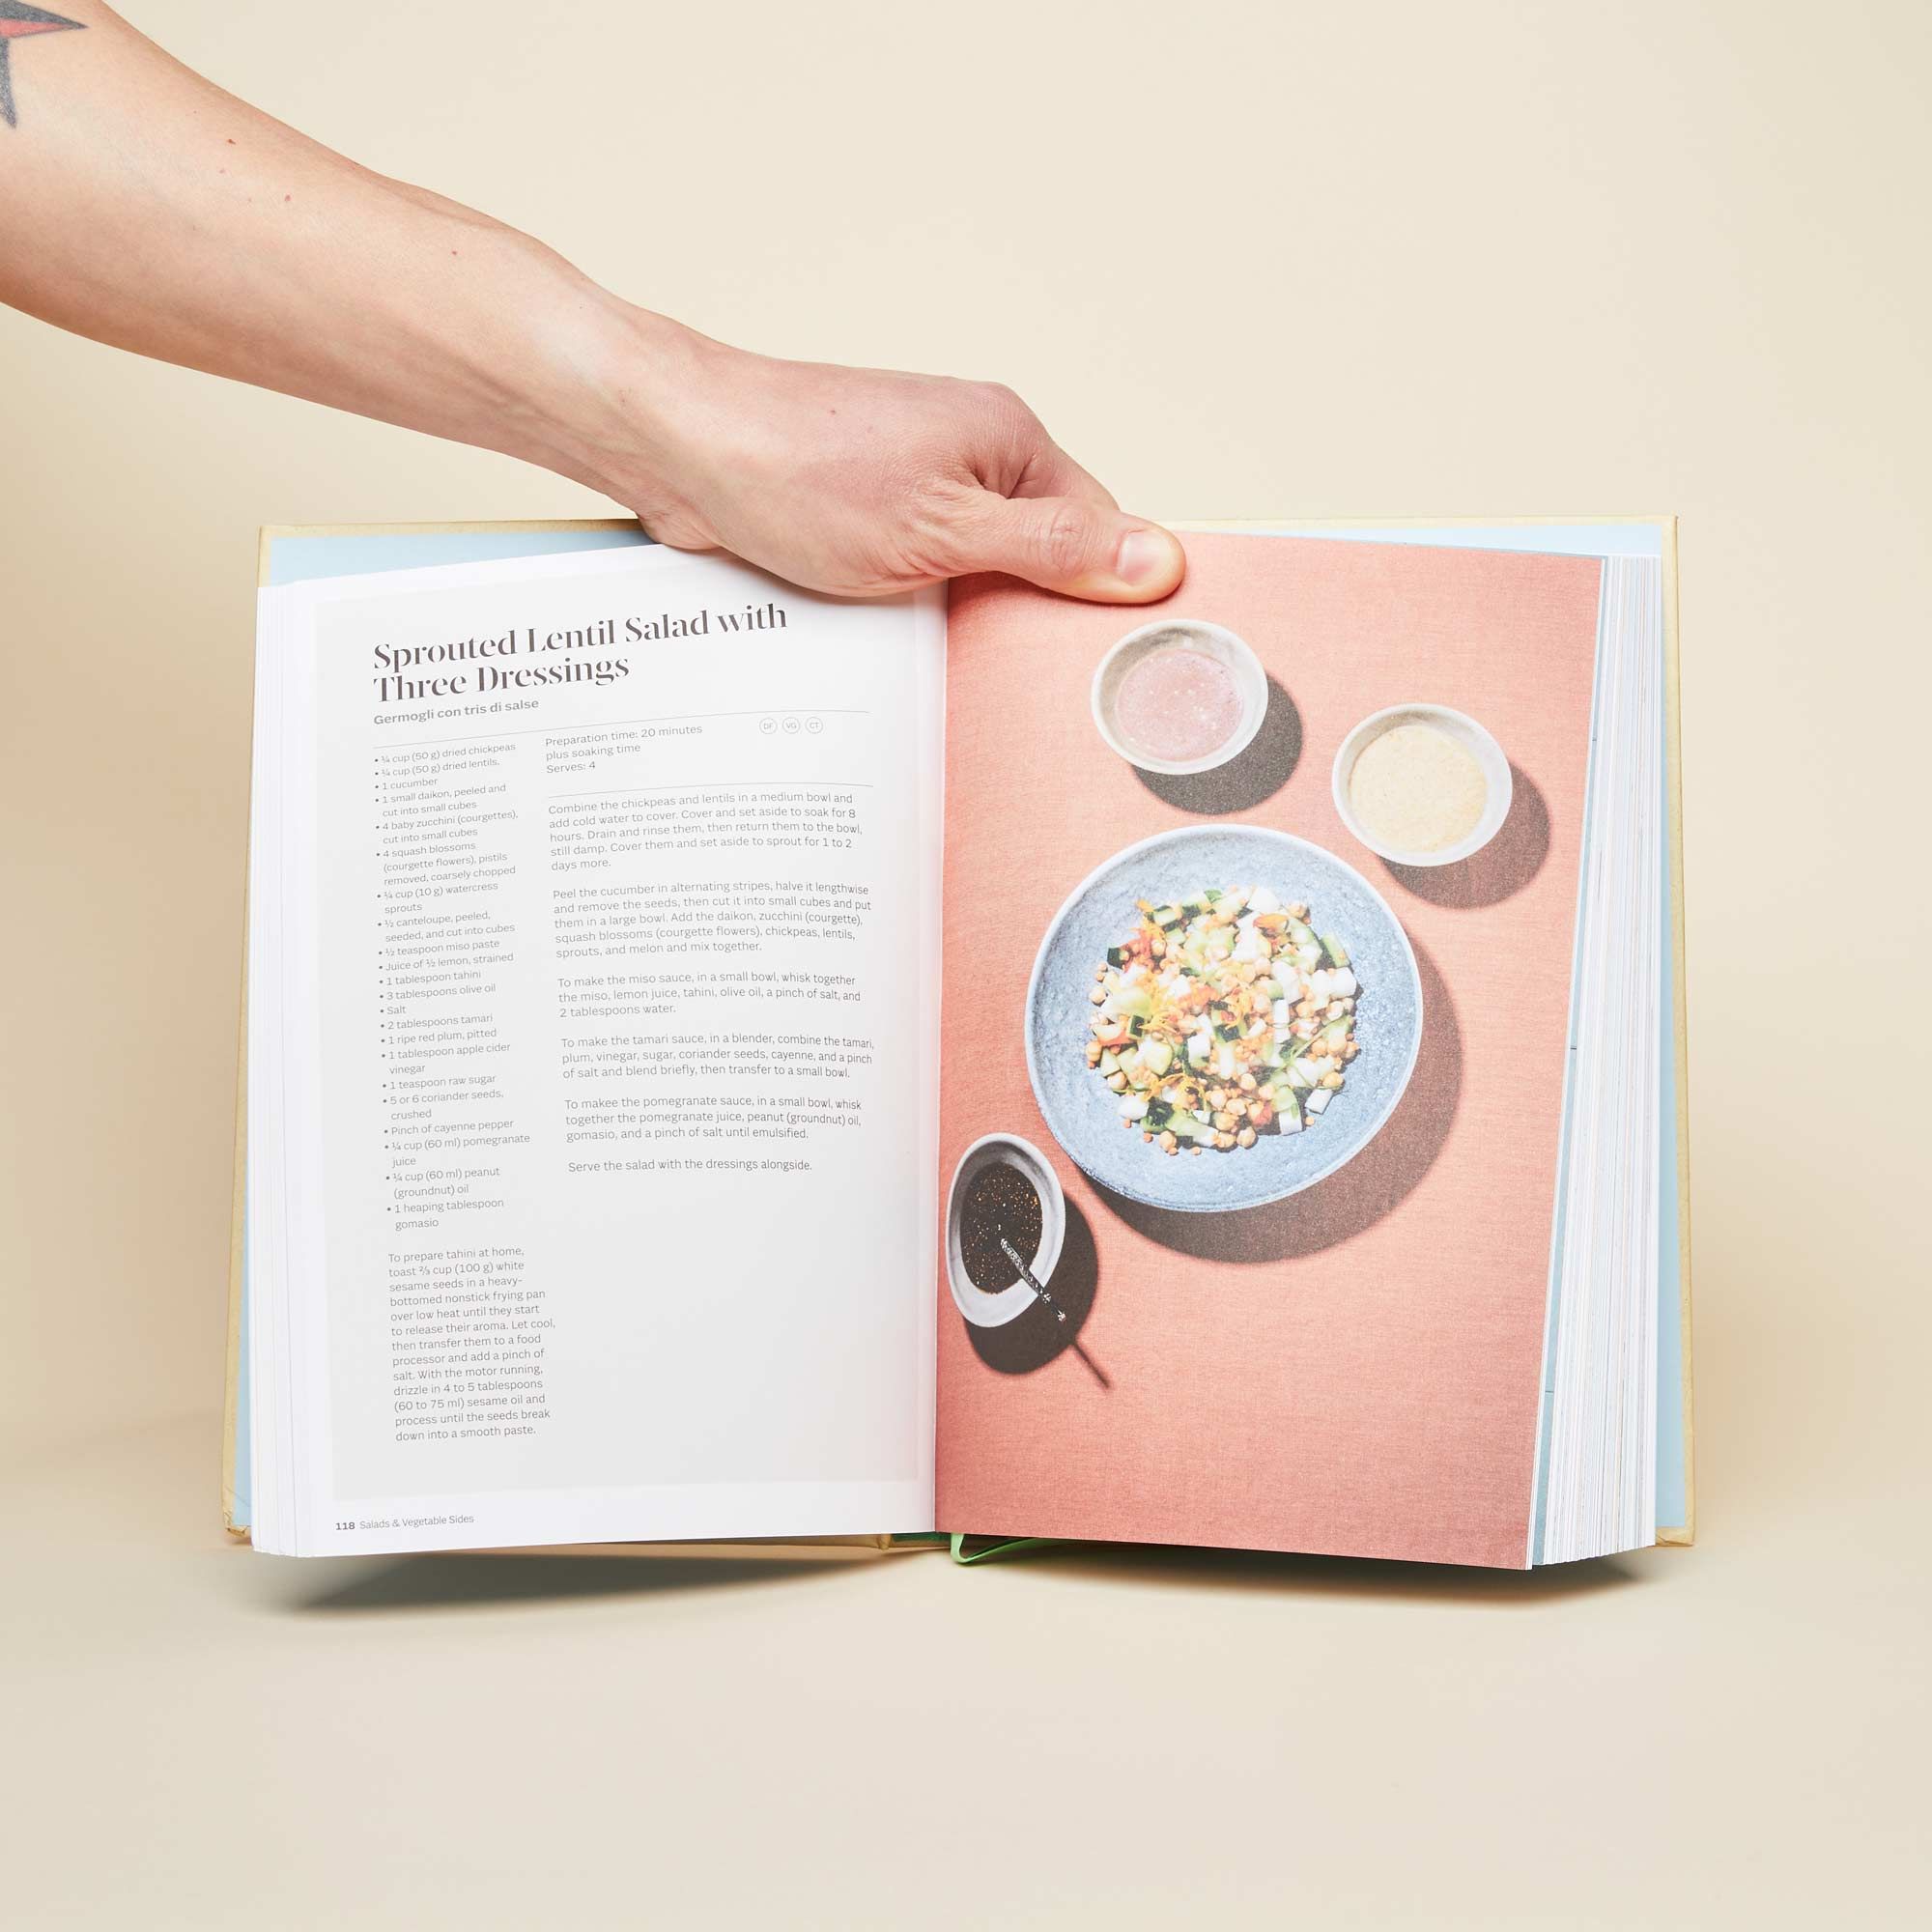 Two-page spread showing recipe for and photograph of a lentil salad